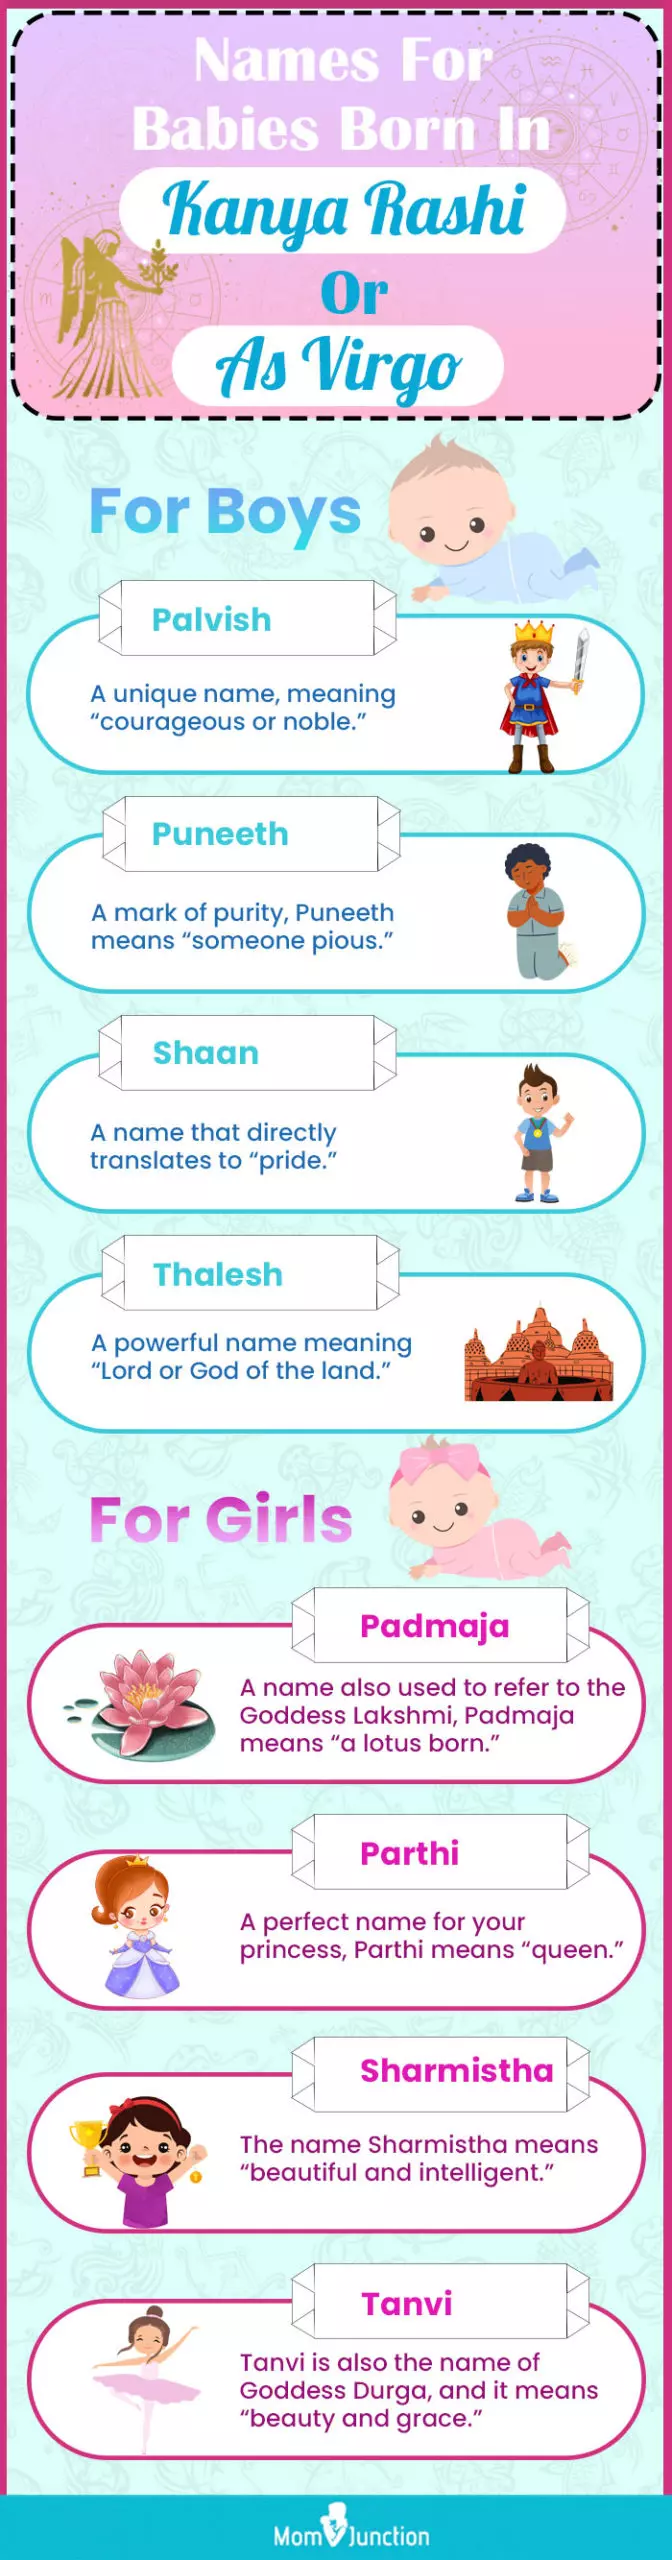 names for babies born in kanya rashi or as virgo (infographic)